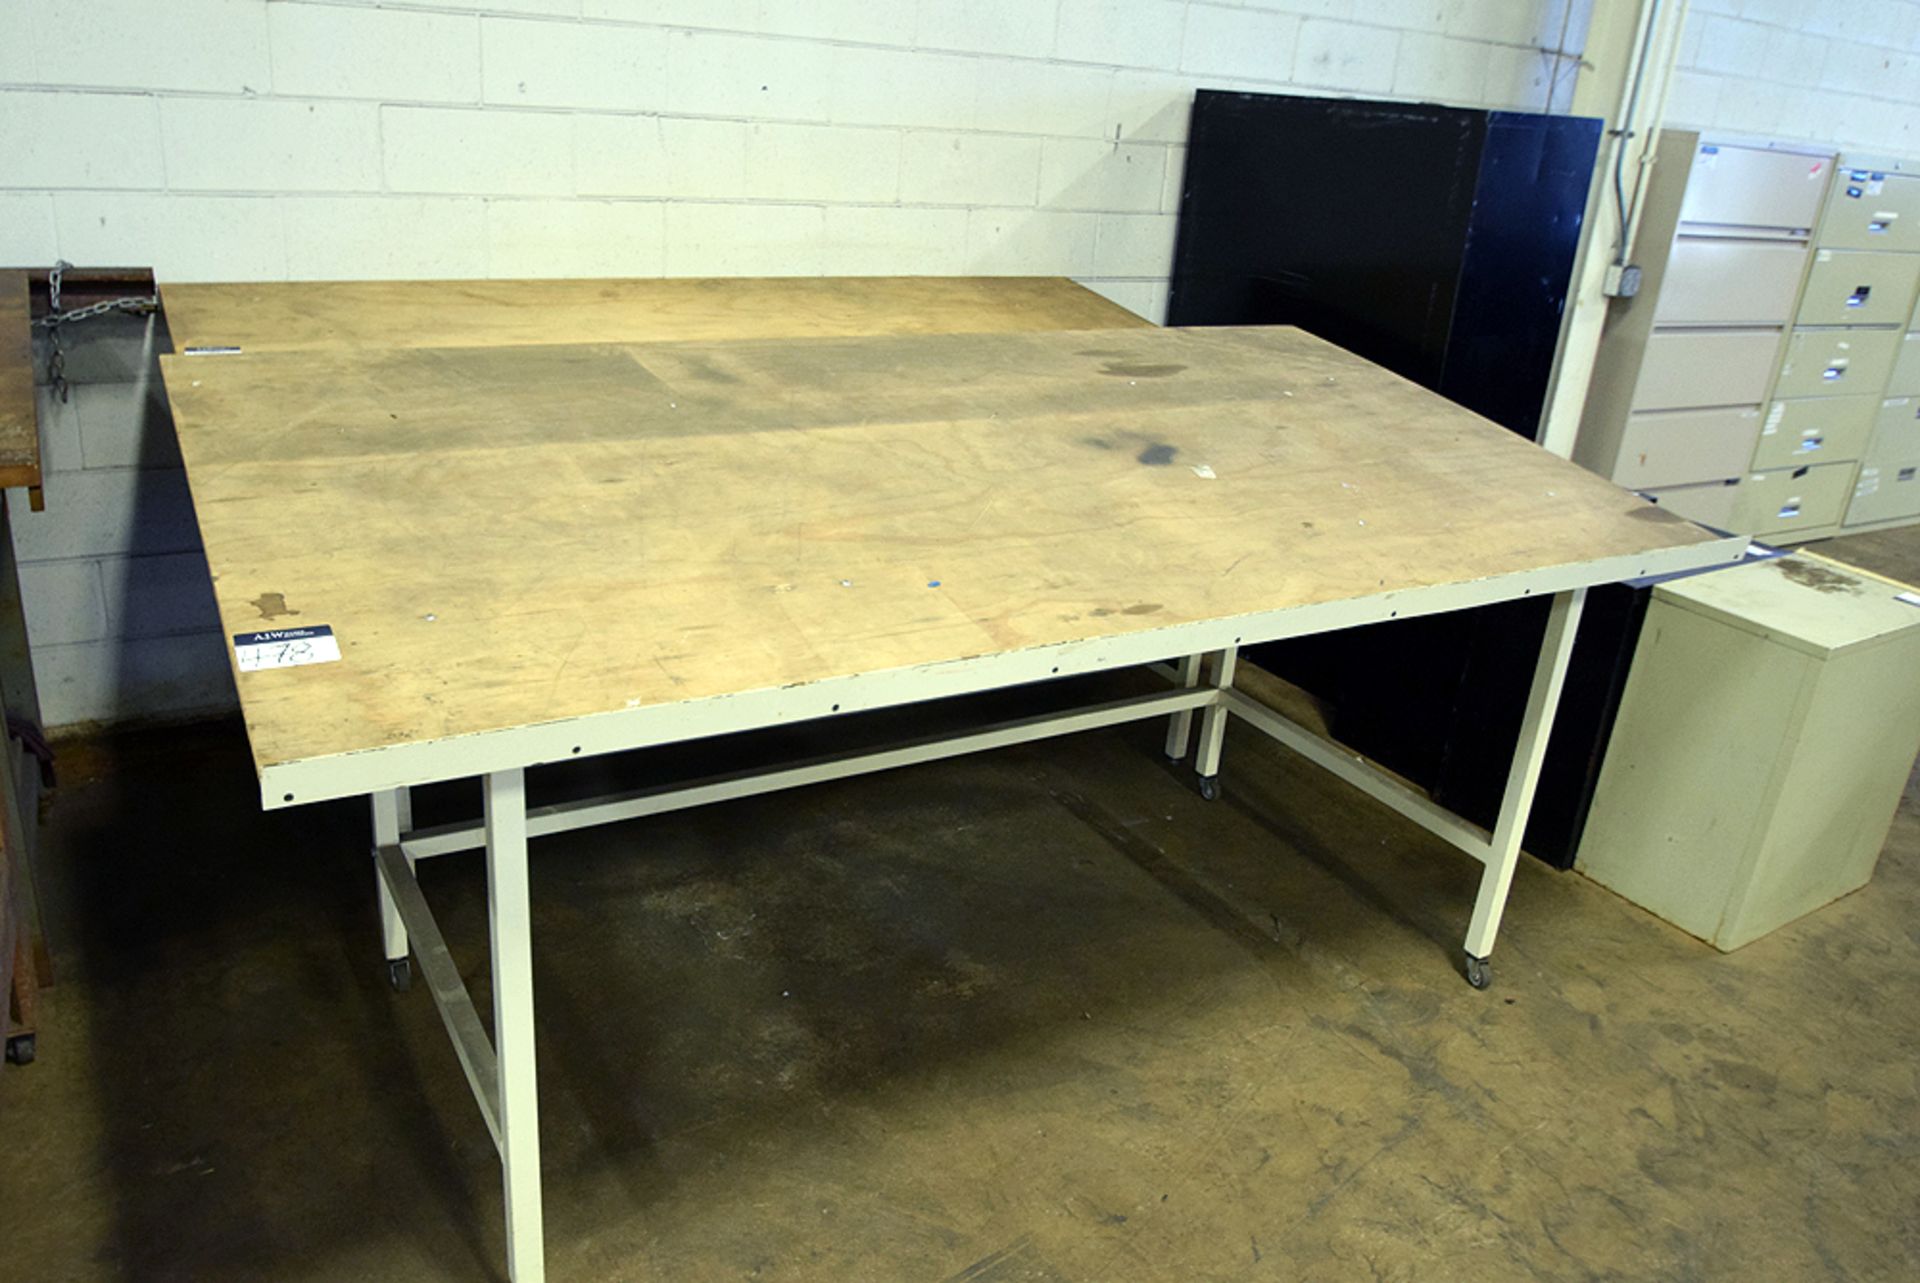 Portable Drafting Table, 96"x48" - Image 3 of 4